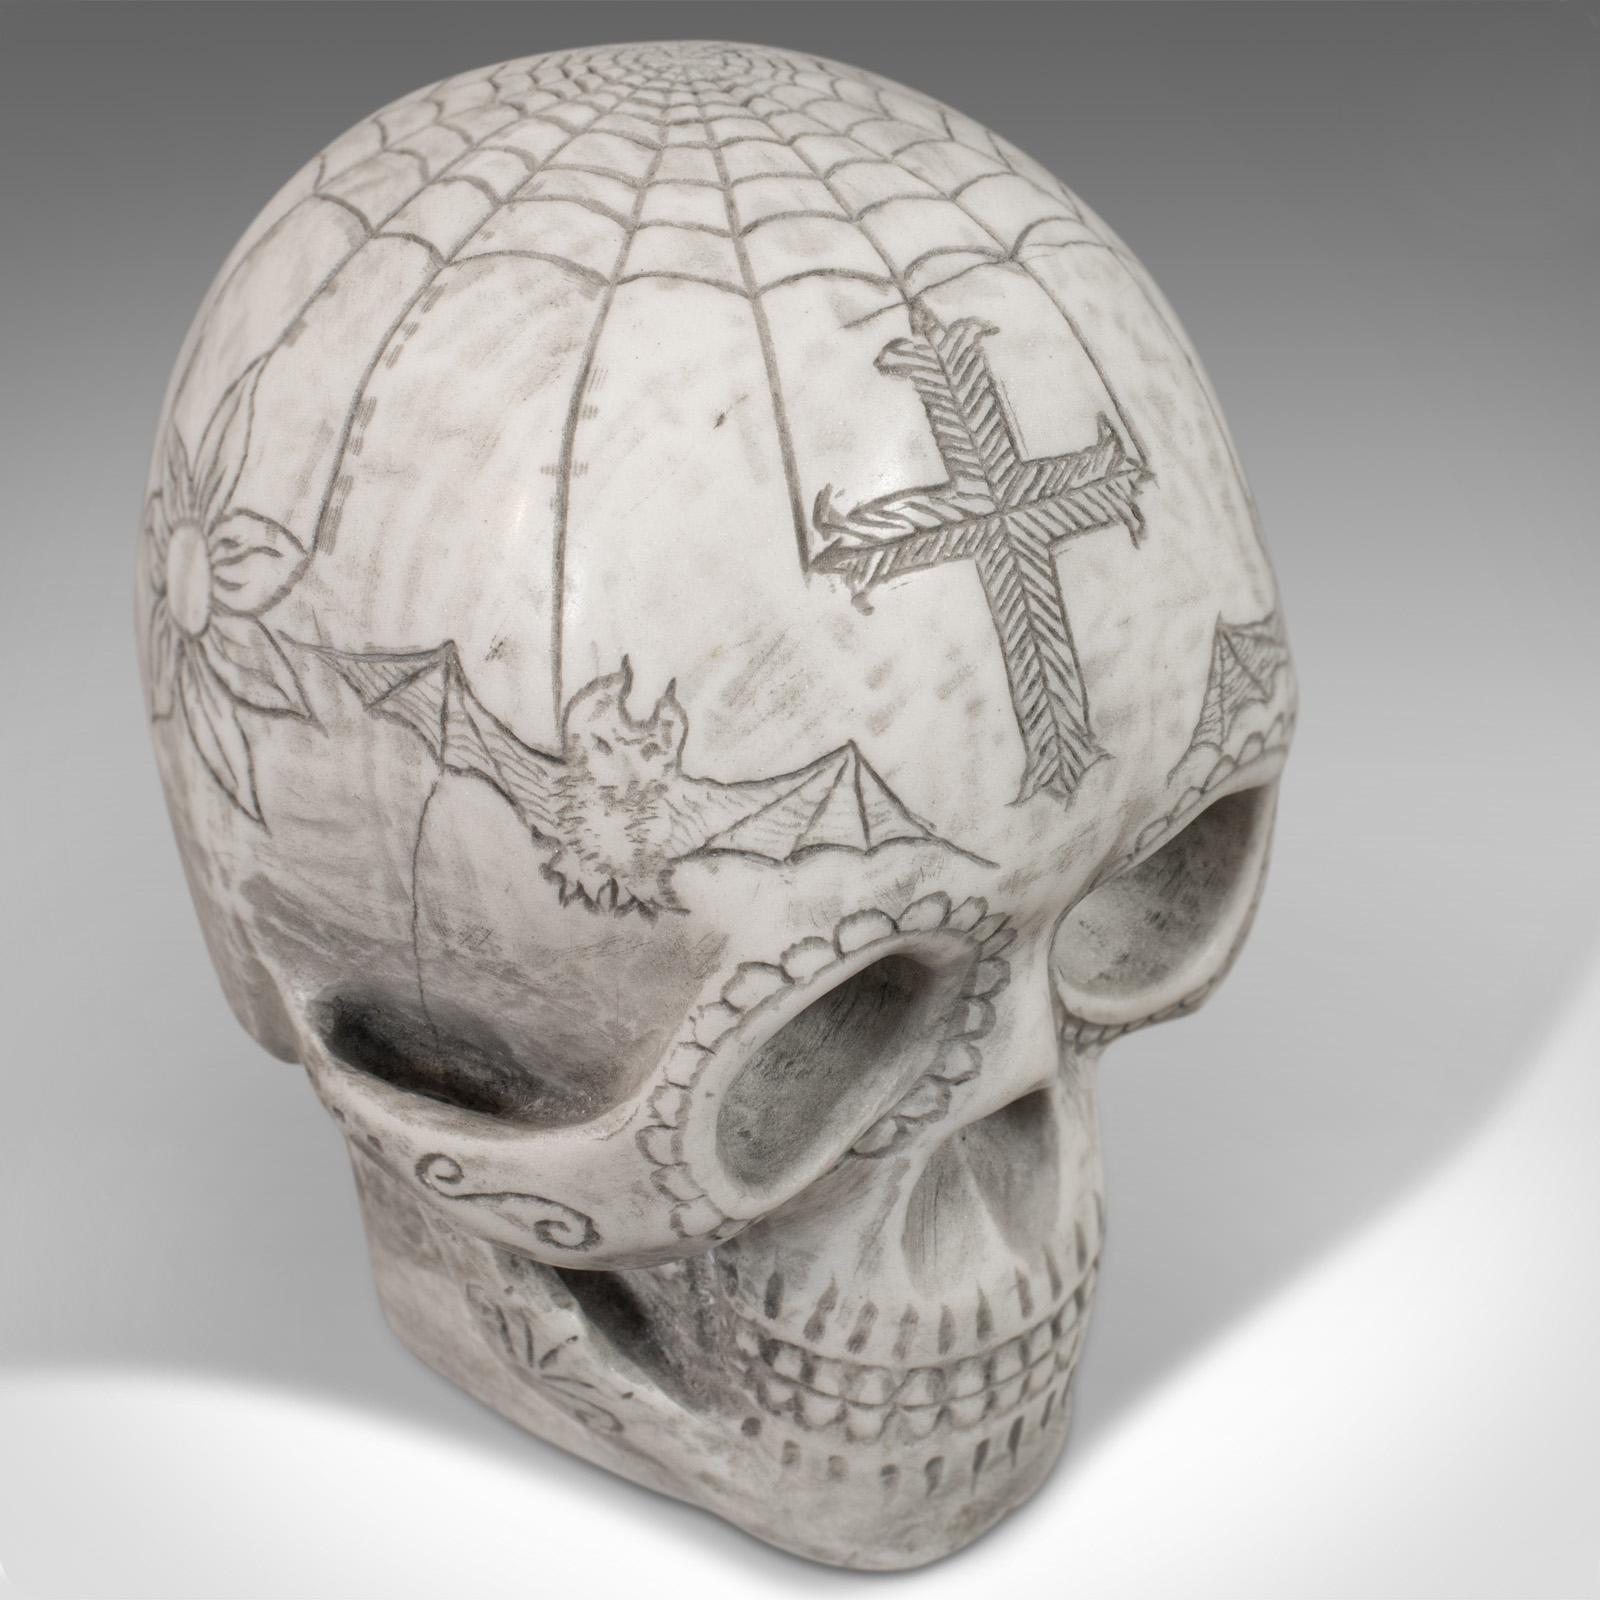 Vintage Hand Decorated Skull, English, Marble, Ornament, Paperweight, D. Hurley For Sale 3